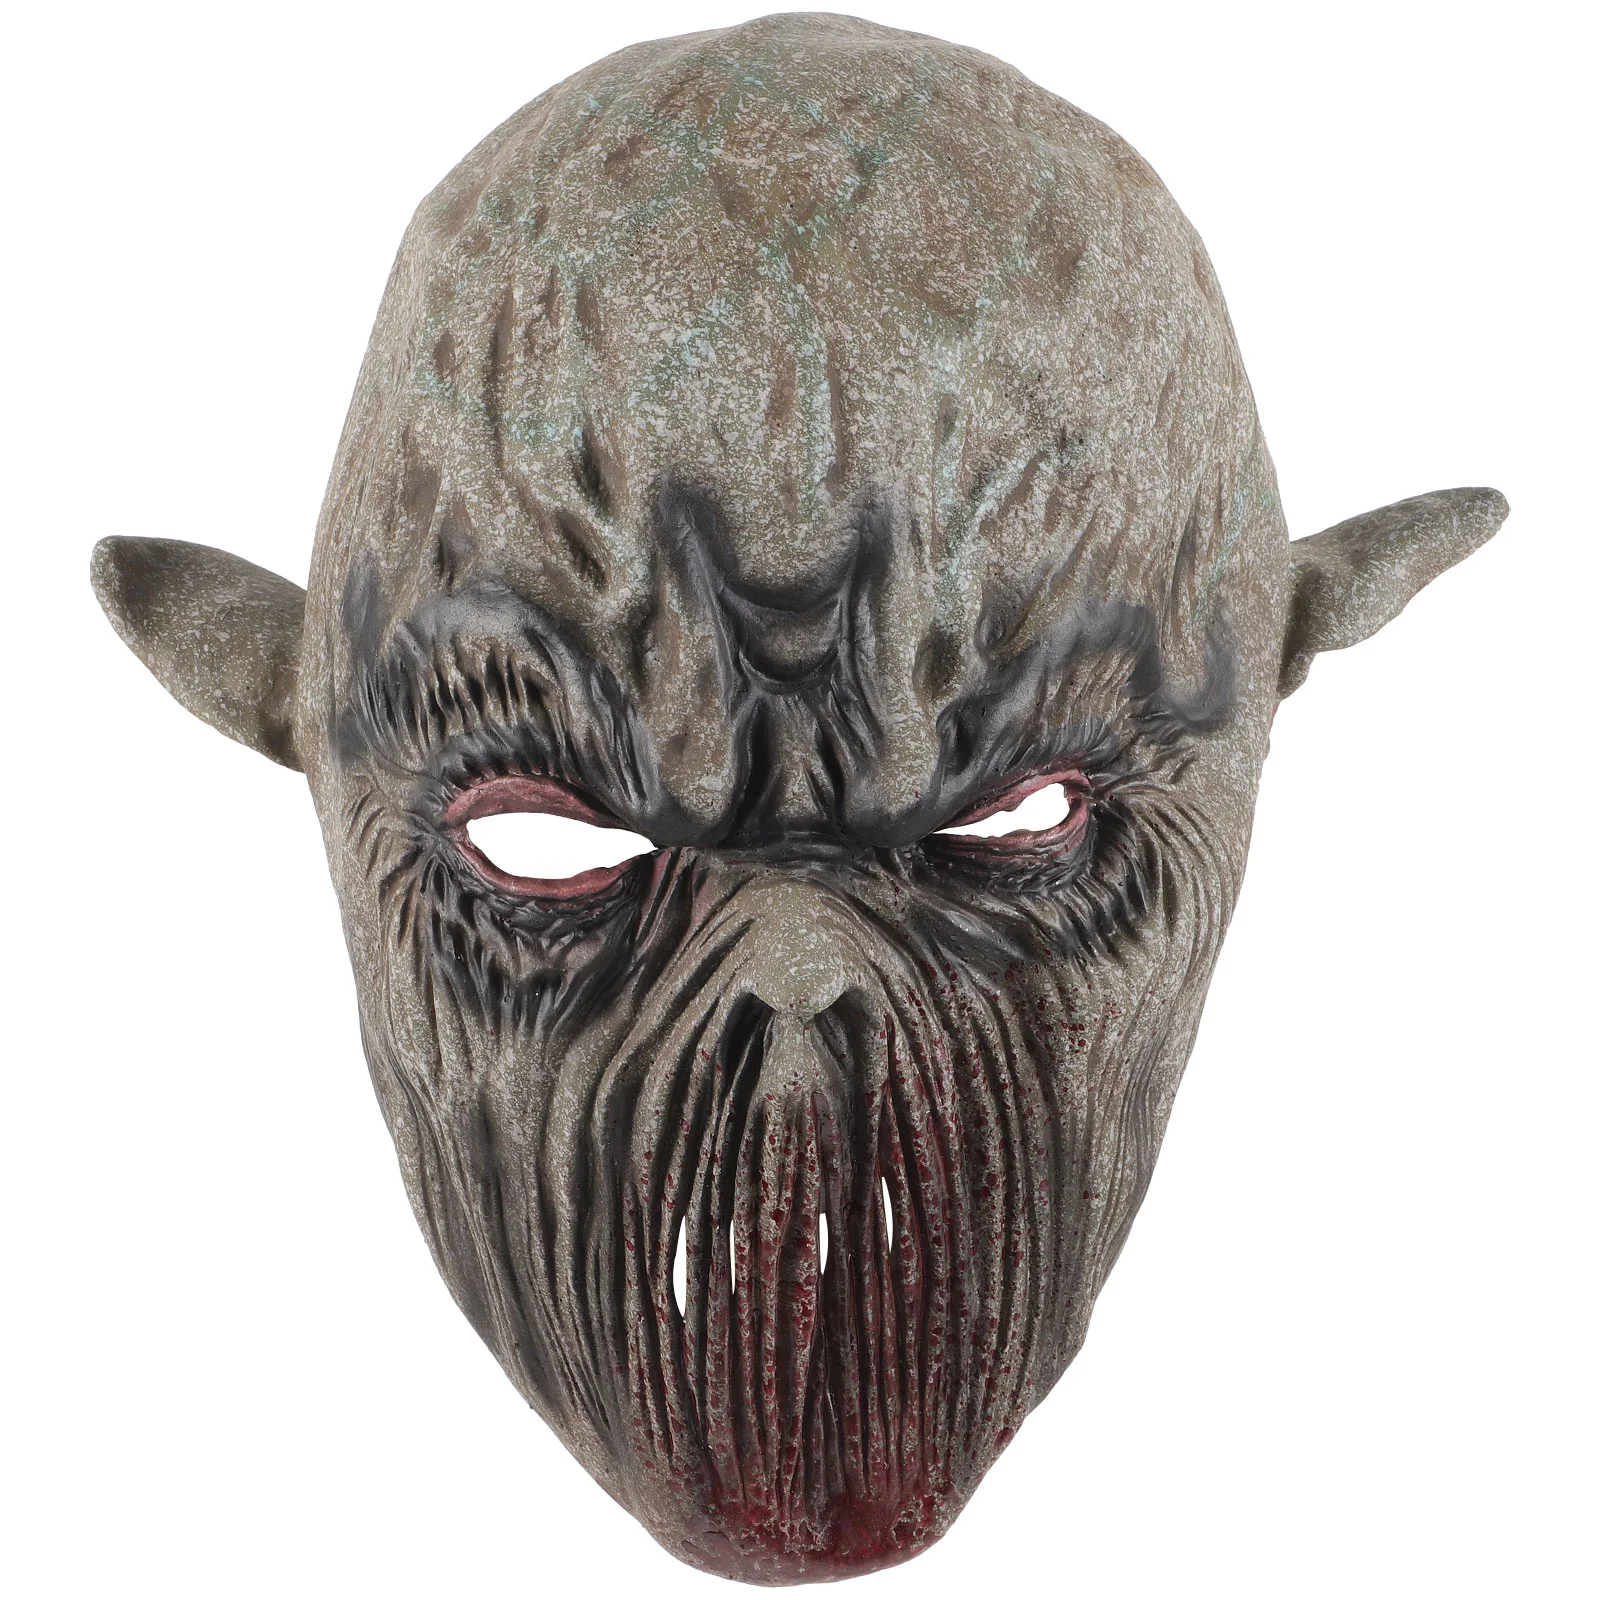 

Halloween Horrible Ghastful Creepy Scary Realistic Monster Mask Masquerade Supplies Party Props Cosplay Costumes